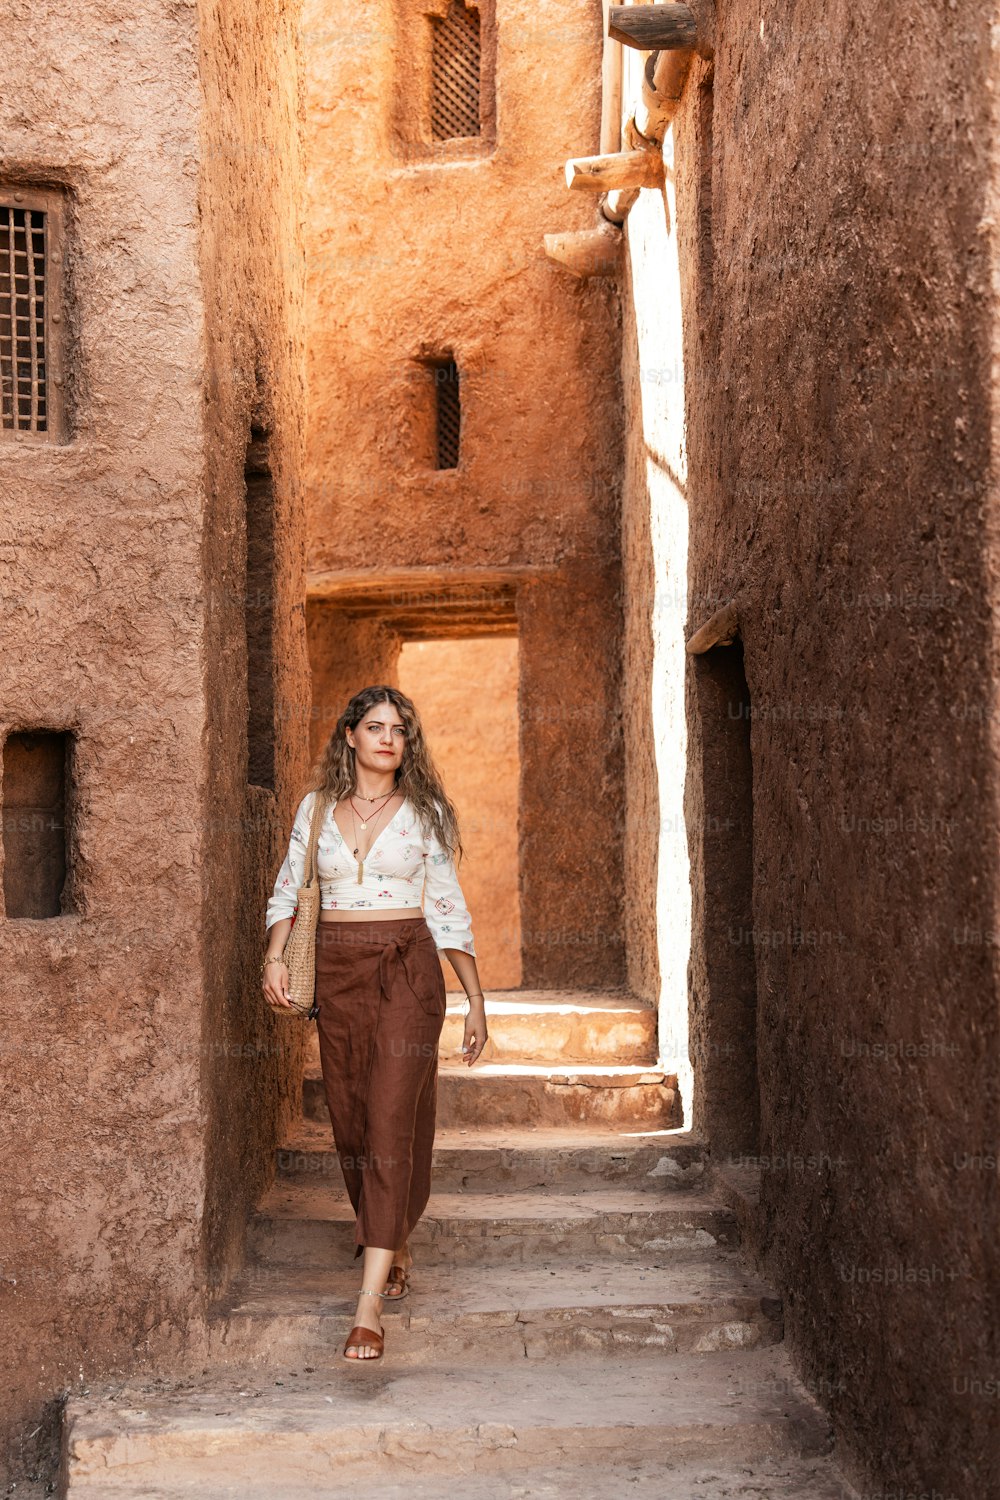 a woman is walking down a narrow alley way